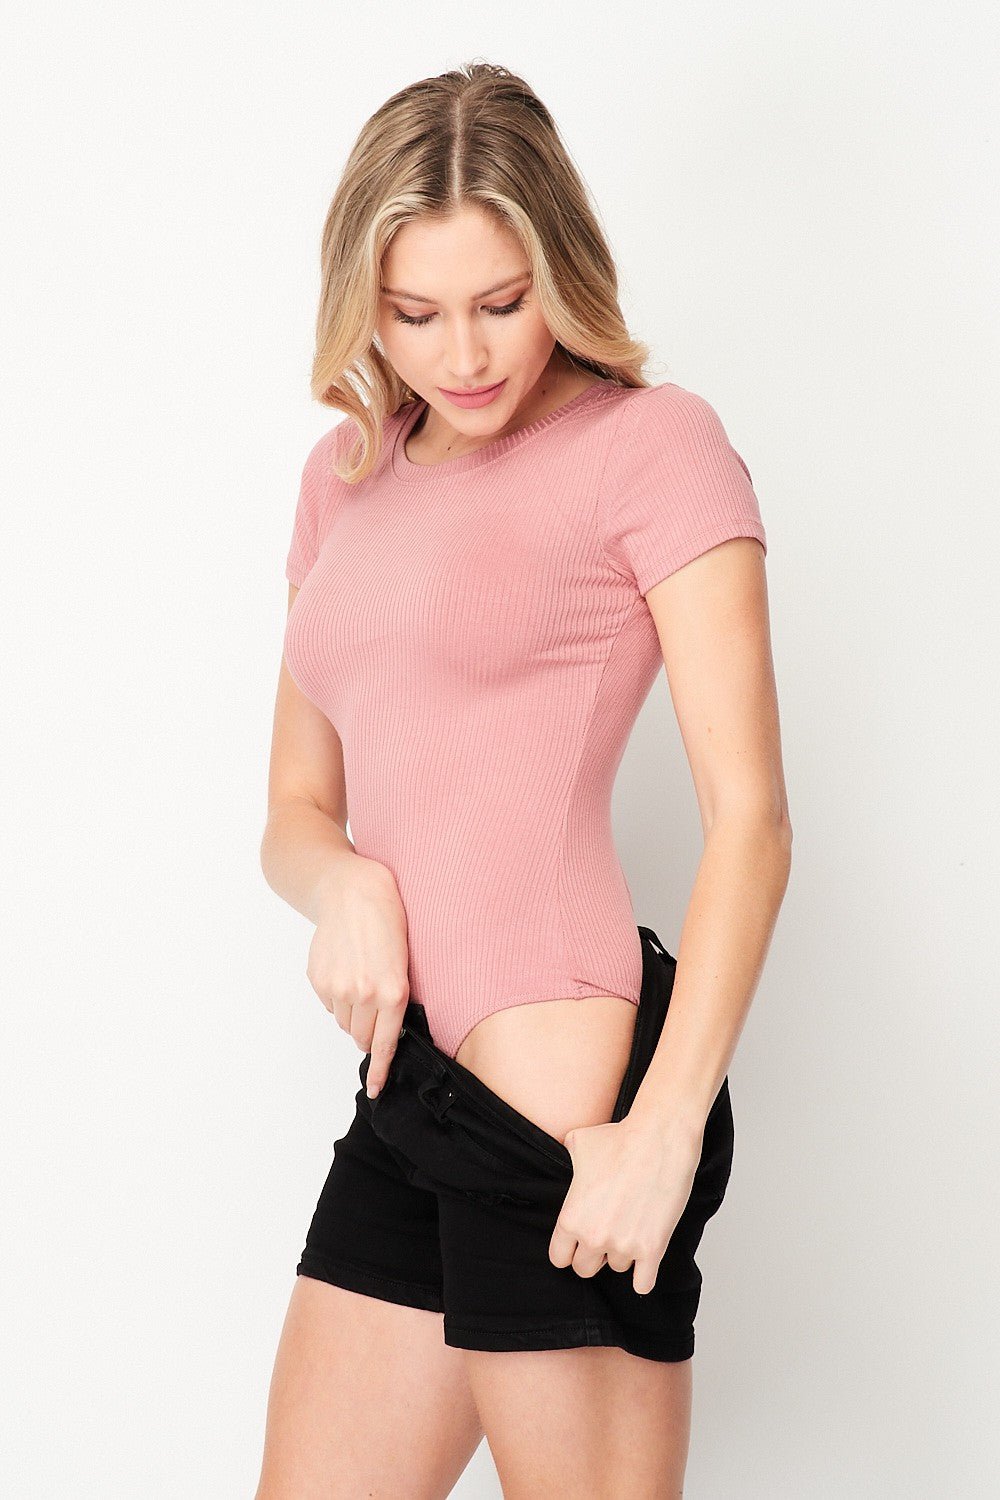 Look cool and feel comfy with this Solid Rib Knit Short Sleeve Bodysuit! It’s made of ribbed knit fabric, with a flattering round neckline and awesome short sleeves – you’ll be ready to rock’n’roll with your fave pair of jeans and sneakers, in no time! So, don’t hesitate, grab it now to be the comfiest and chicest one in sight.   93%Rayon 7%Spandex